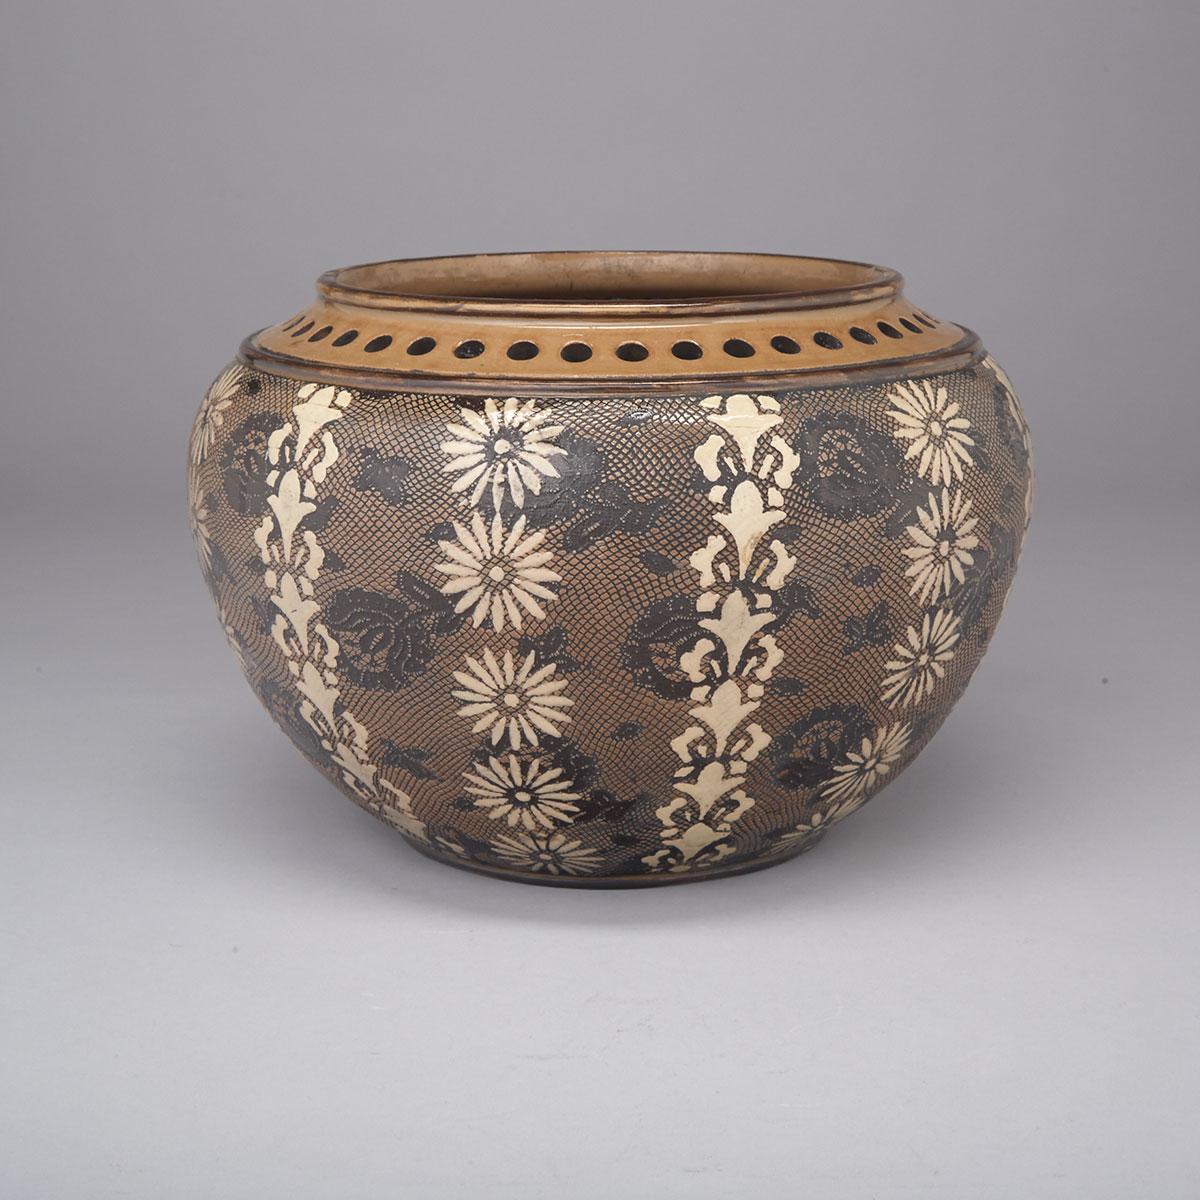 Doulton & Slater’s Patent Stoneware Planter, early 20th century